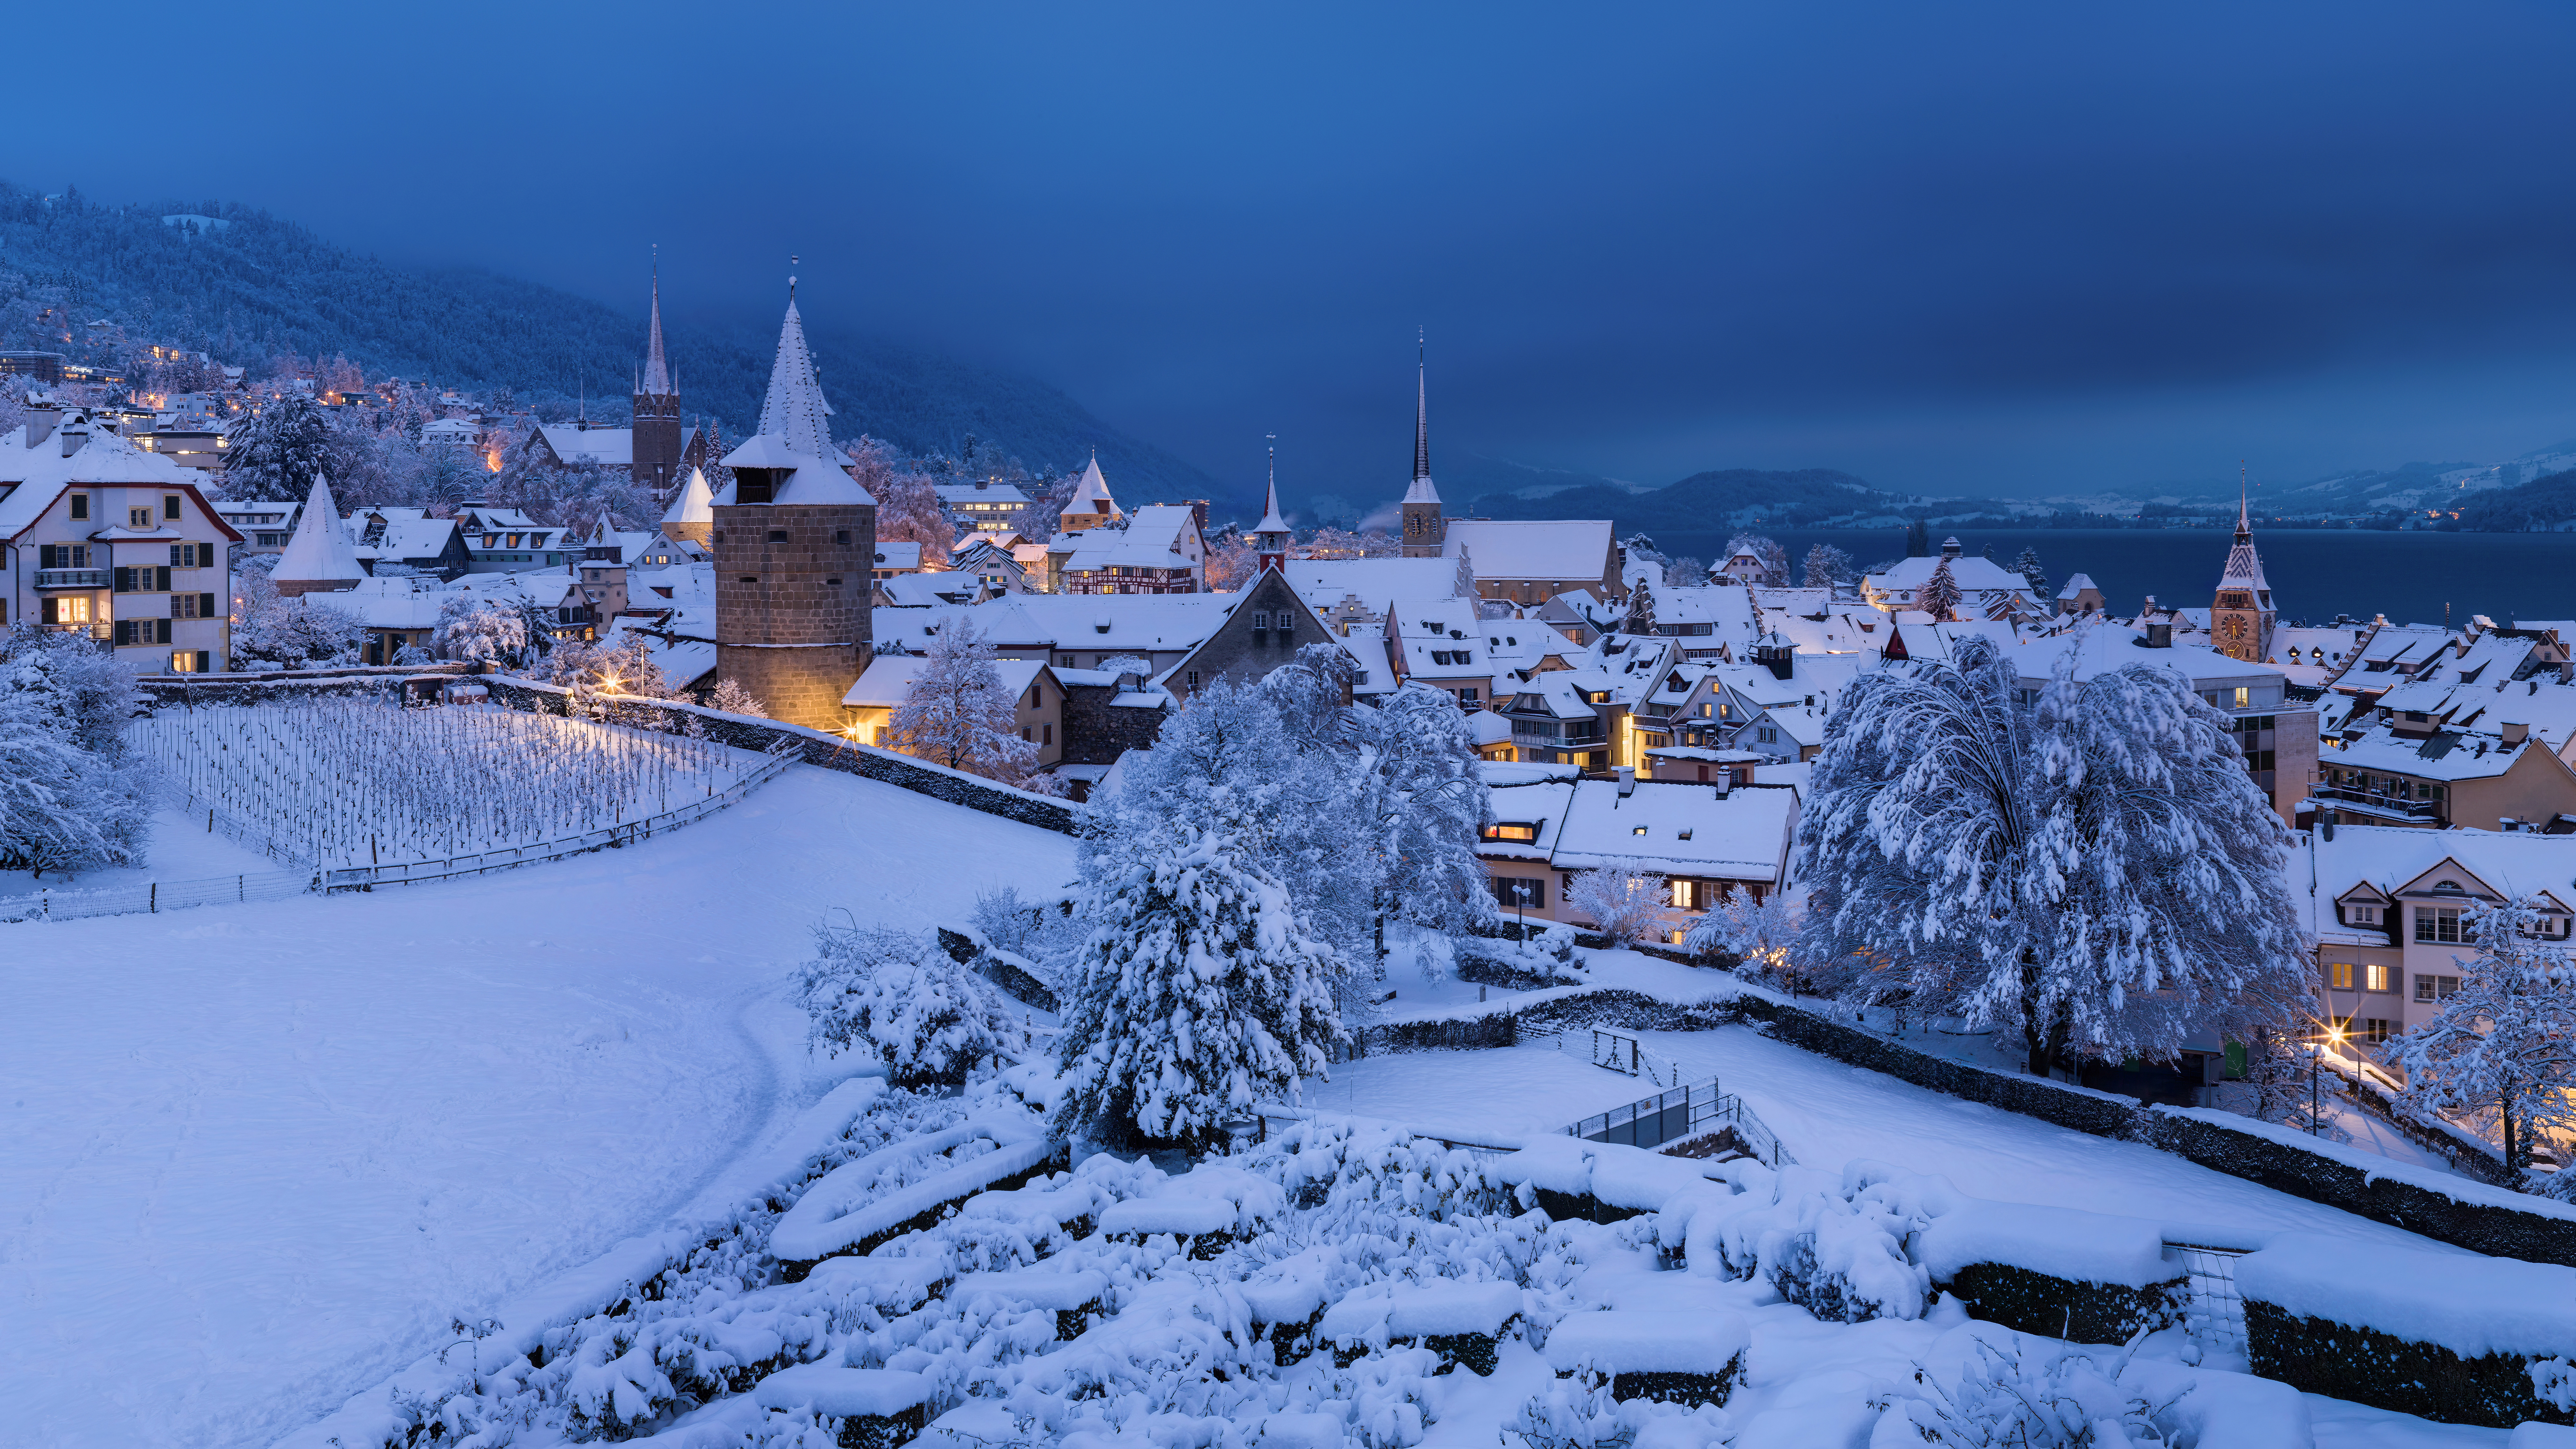 General 8192x4608 winter snow Switzerland photography church evening village rooftops snow covered trees sky city lights city cityscape building